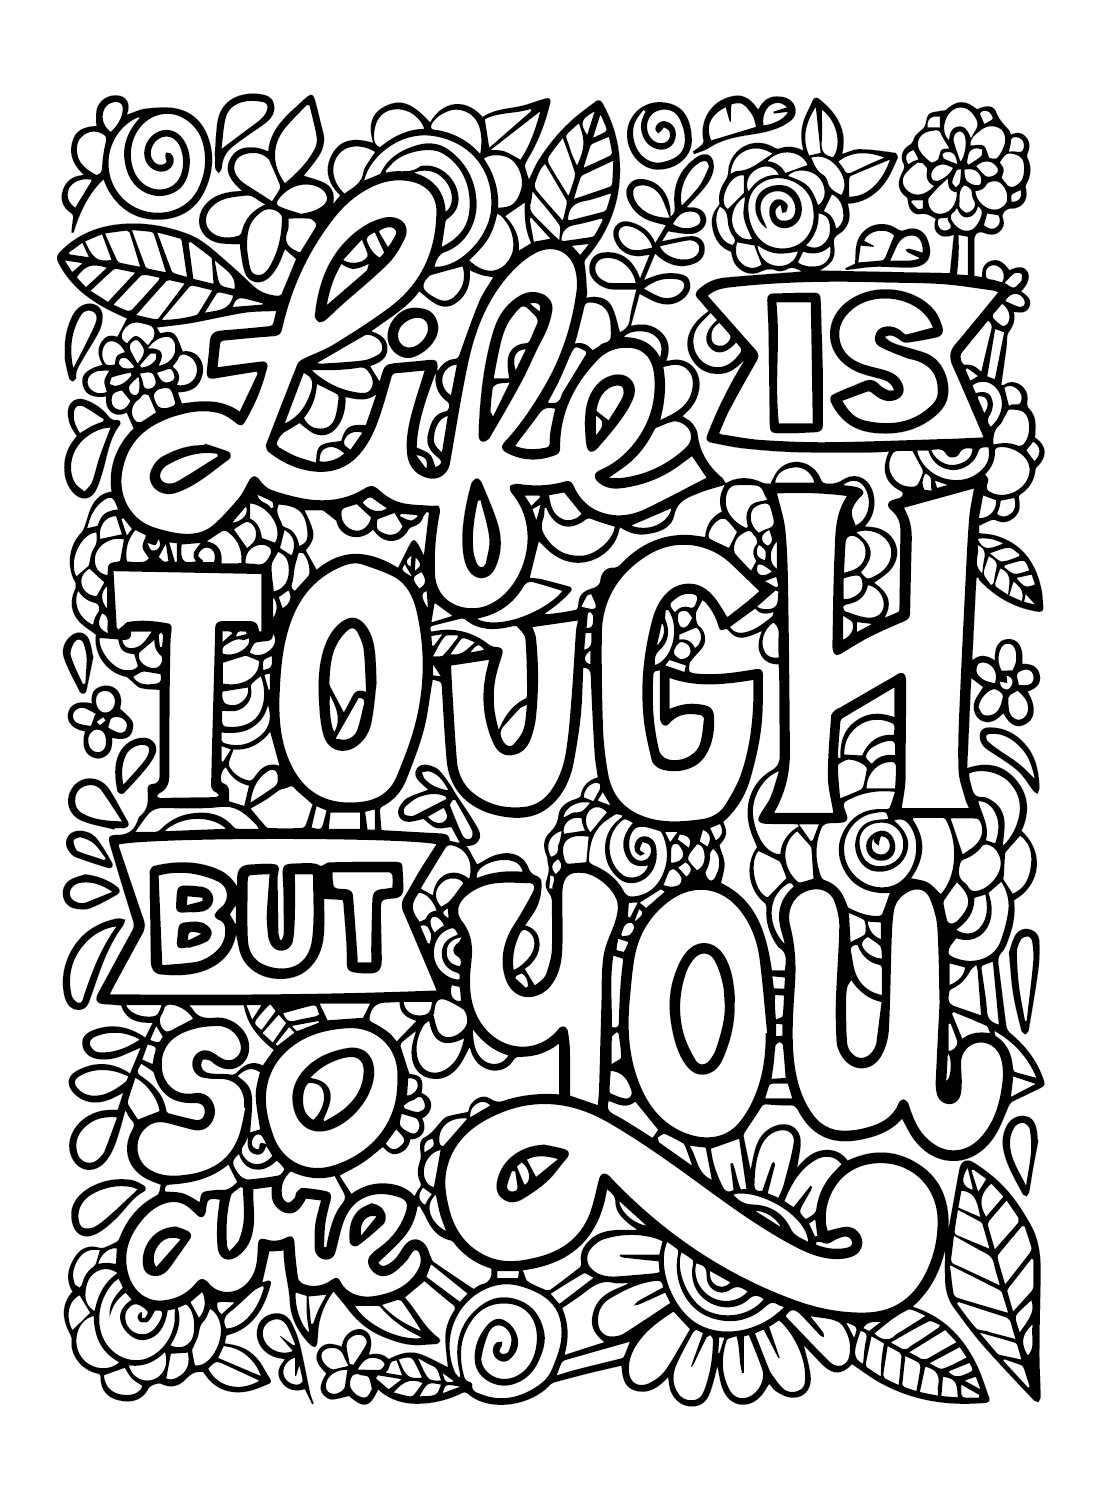 Inspirational Quotes about Life Coloring Page